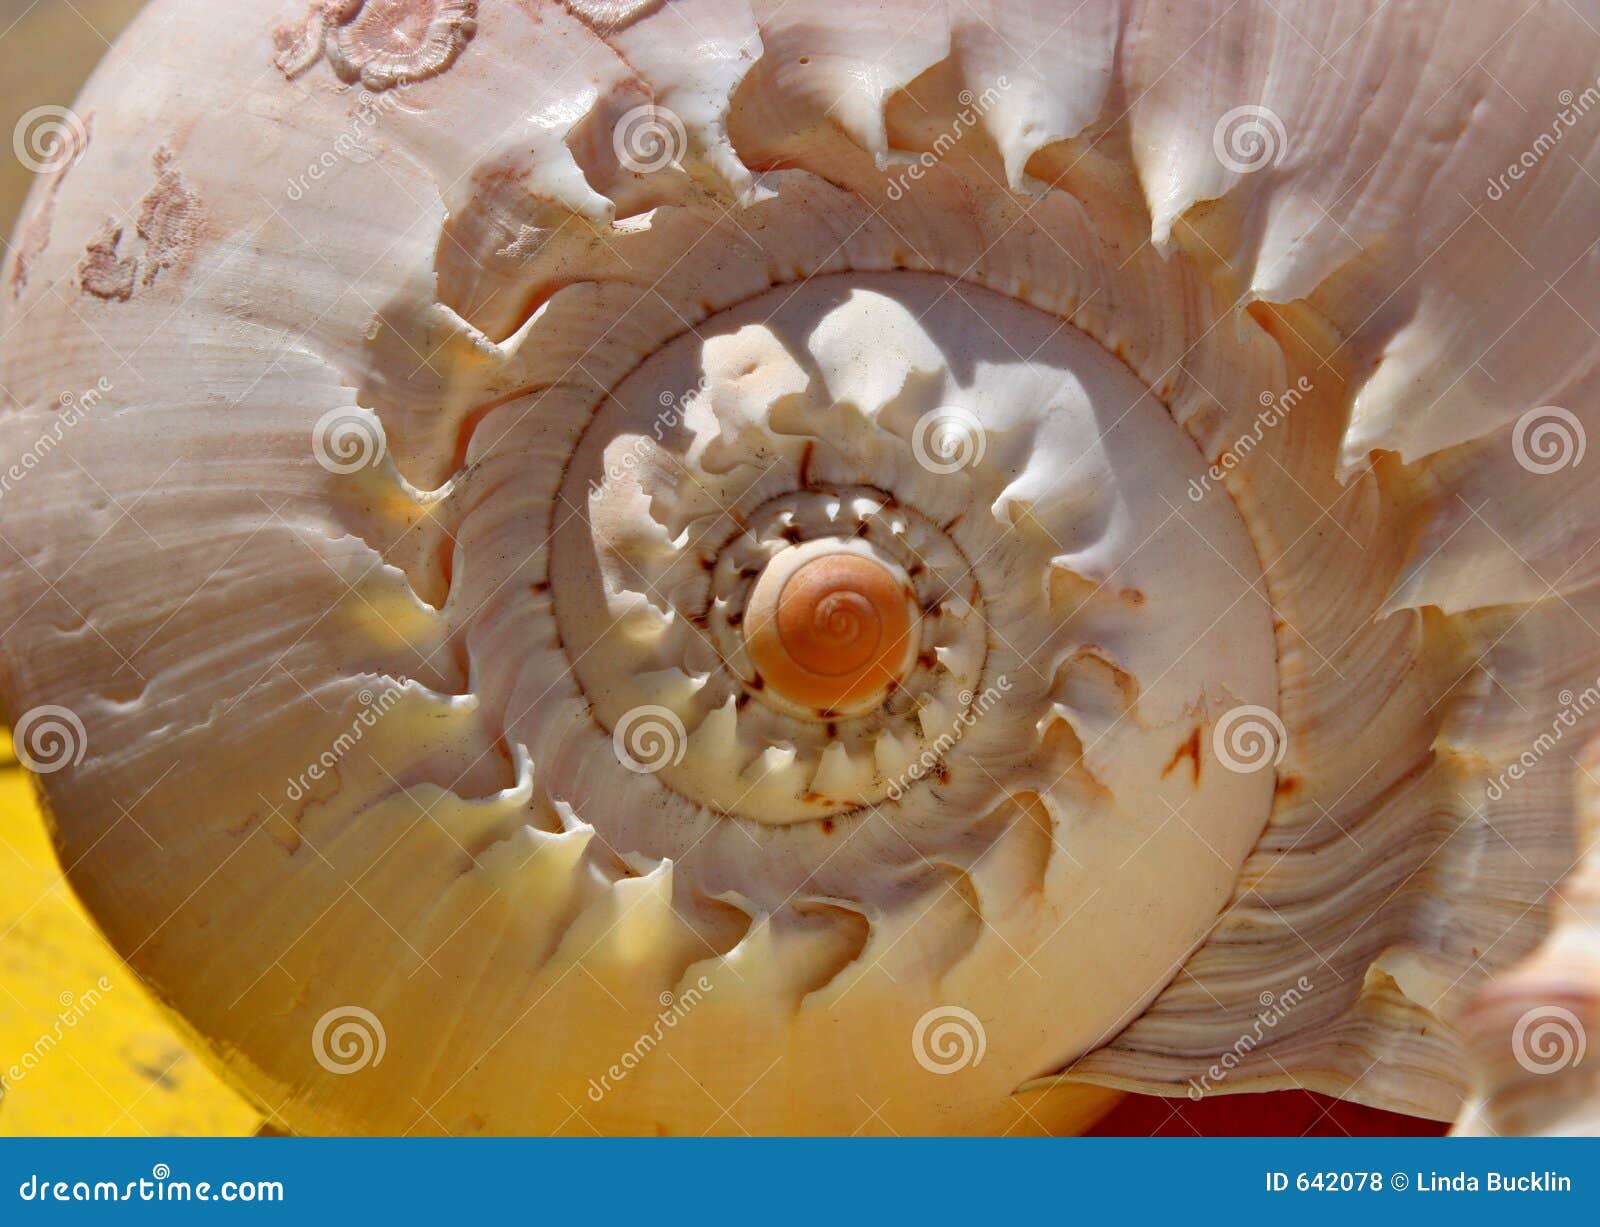 Shell Spiral Stock Photo Image Of Ocean Shells Tropical 642078